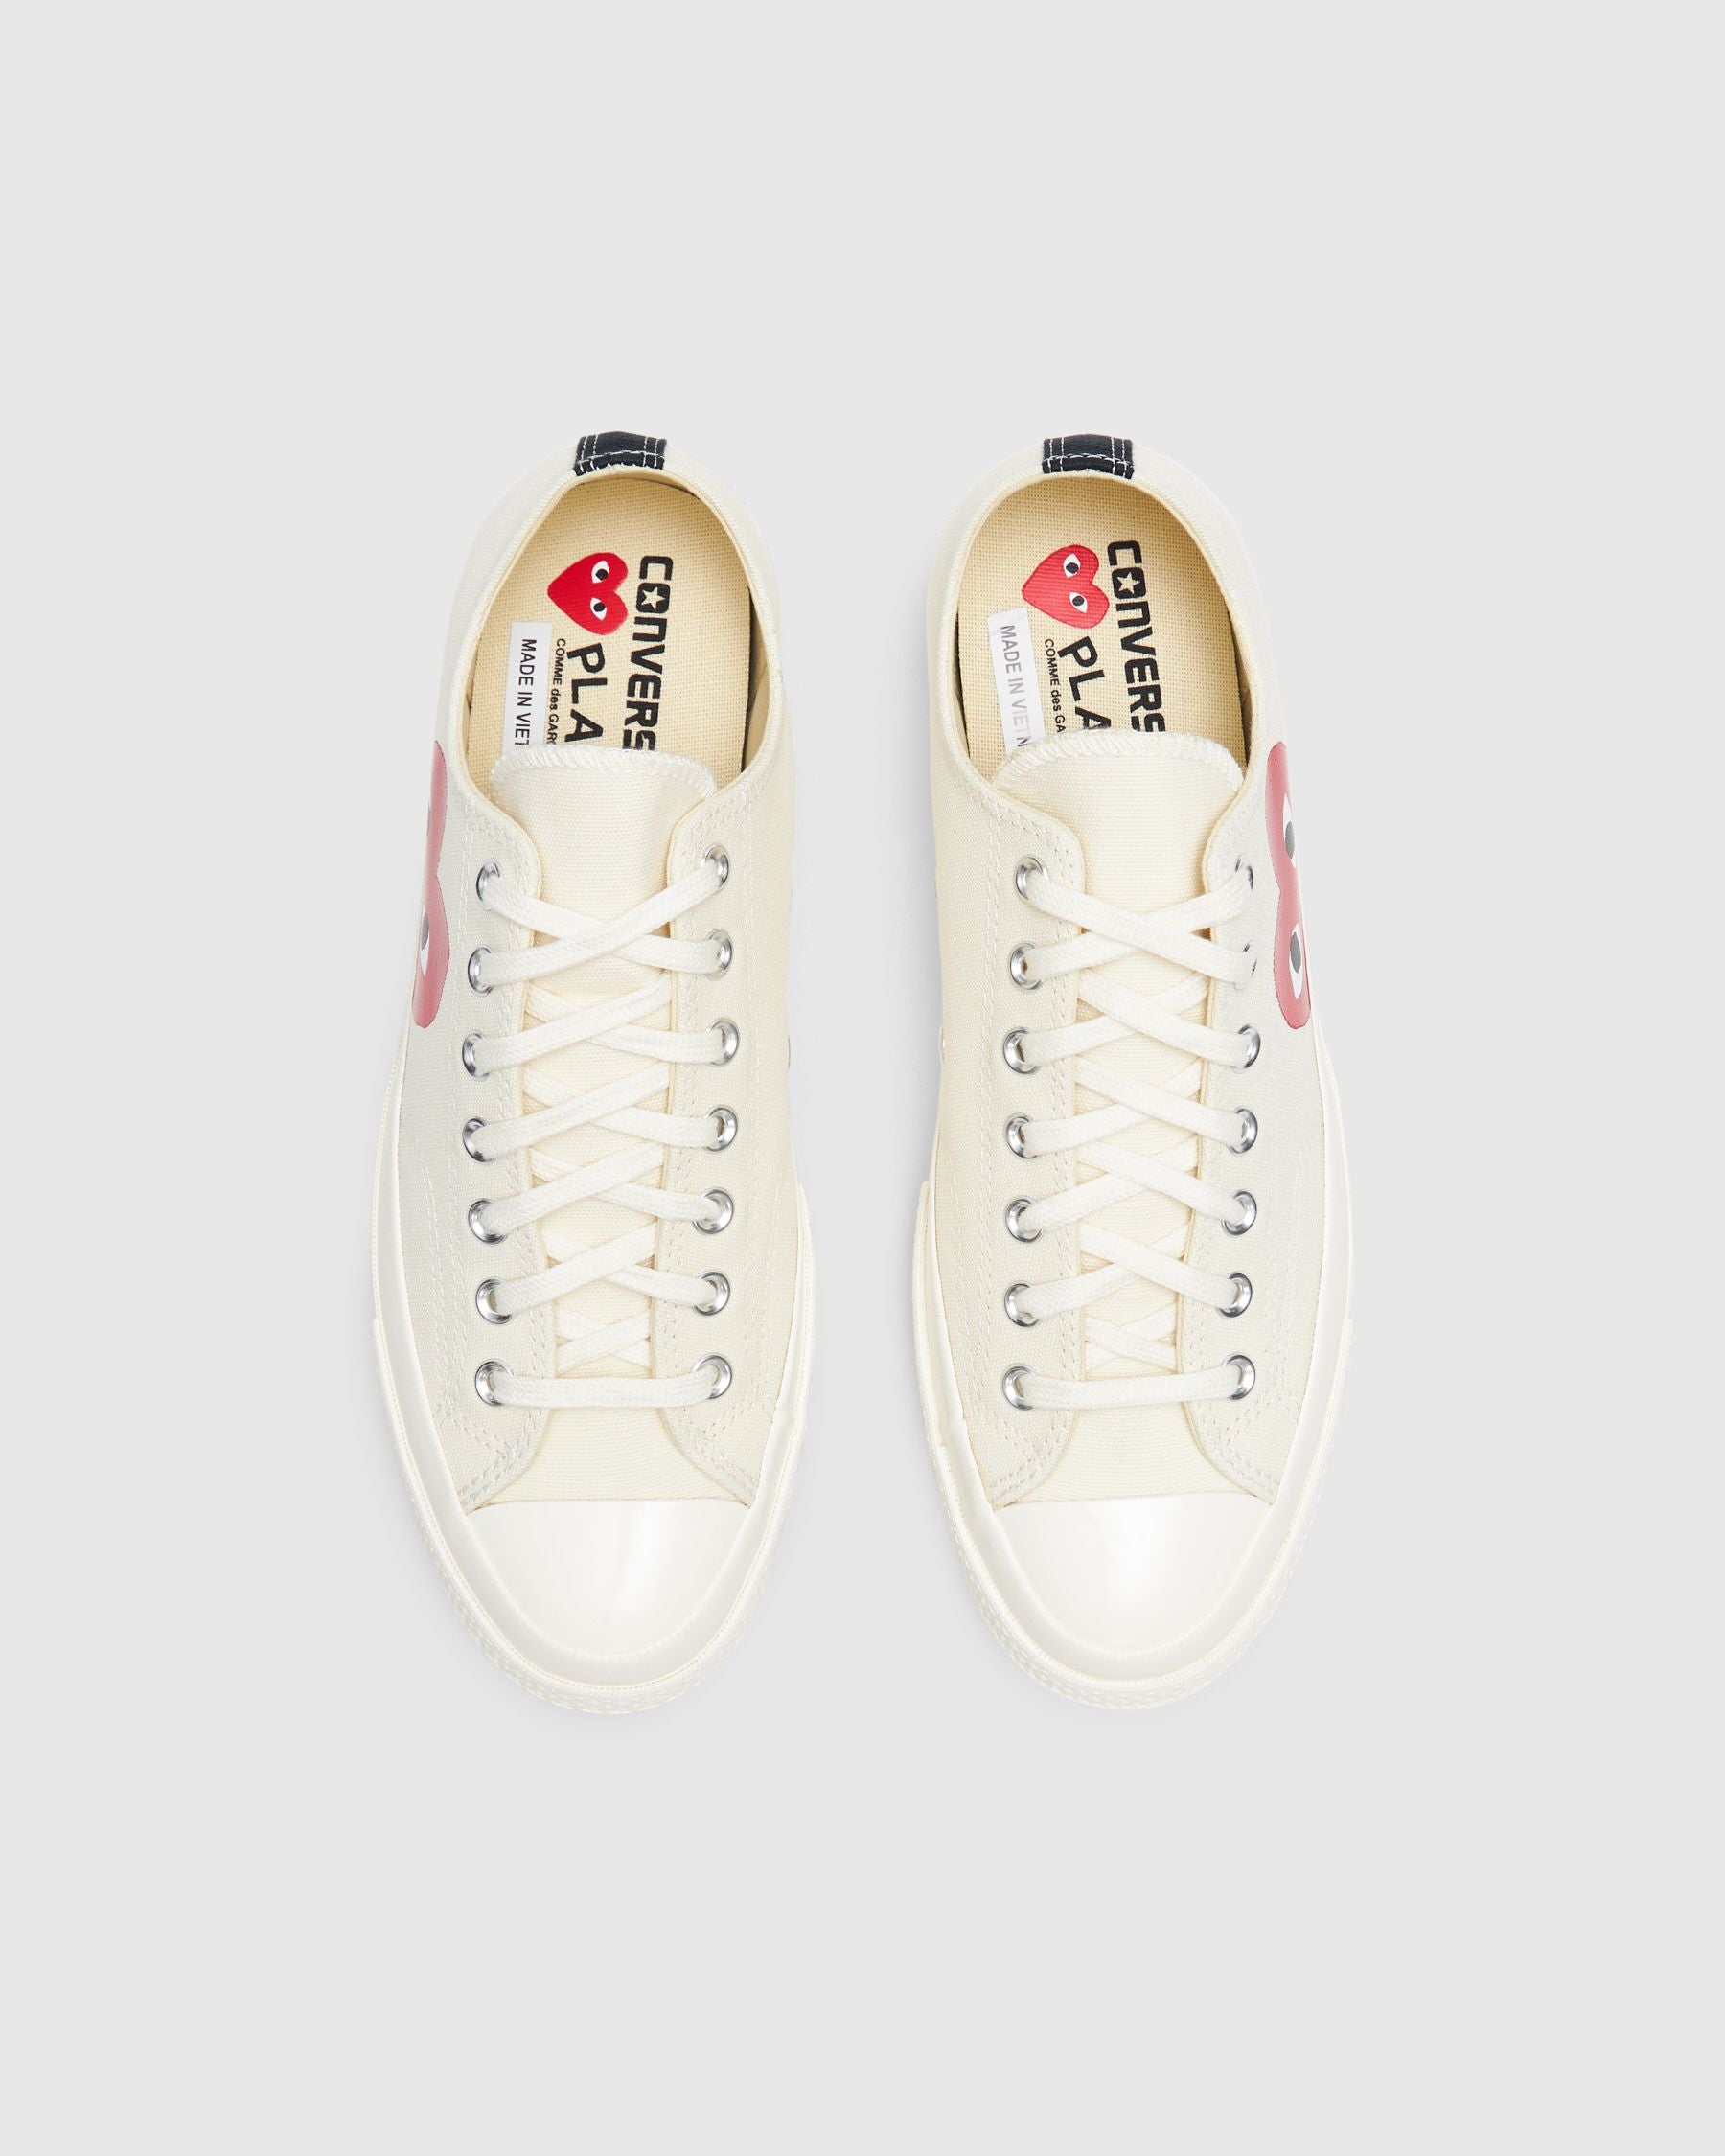 Red Heart Chuck Taylor All Star '70 Low in White